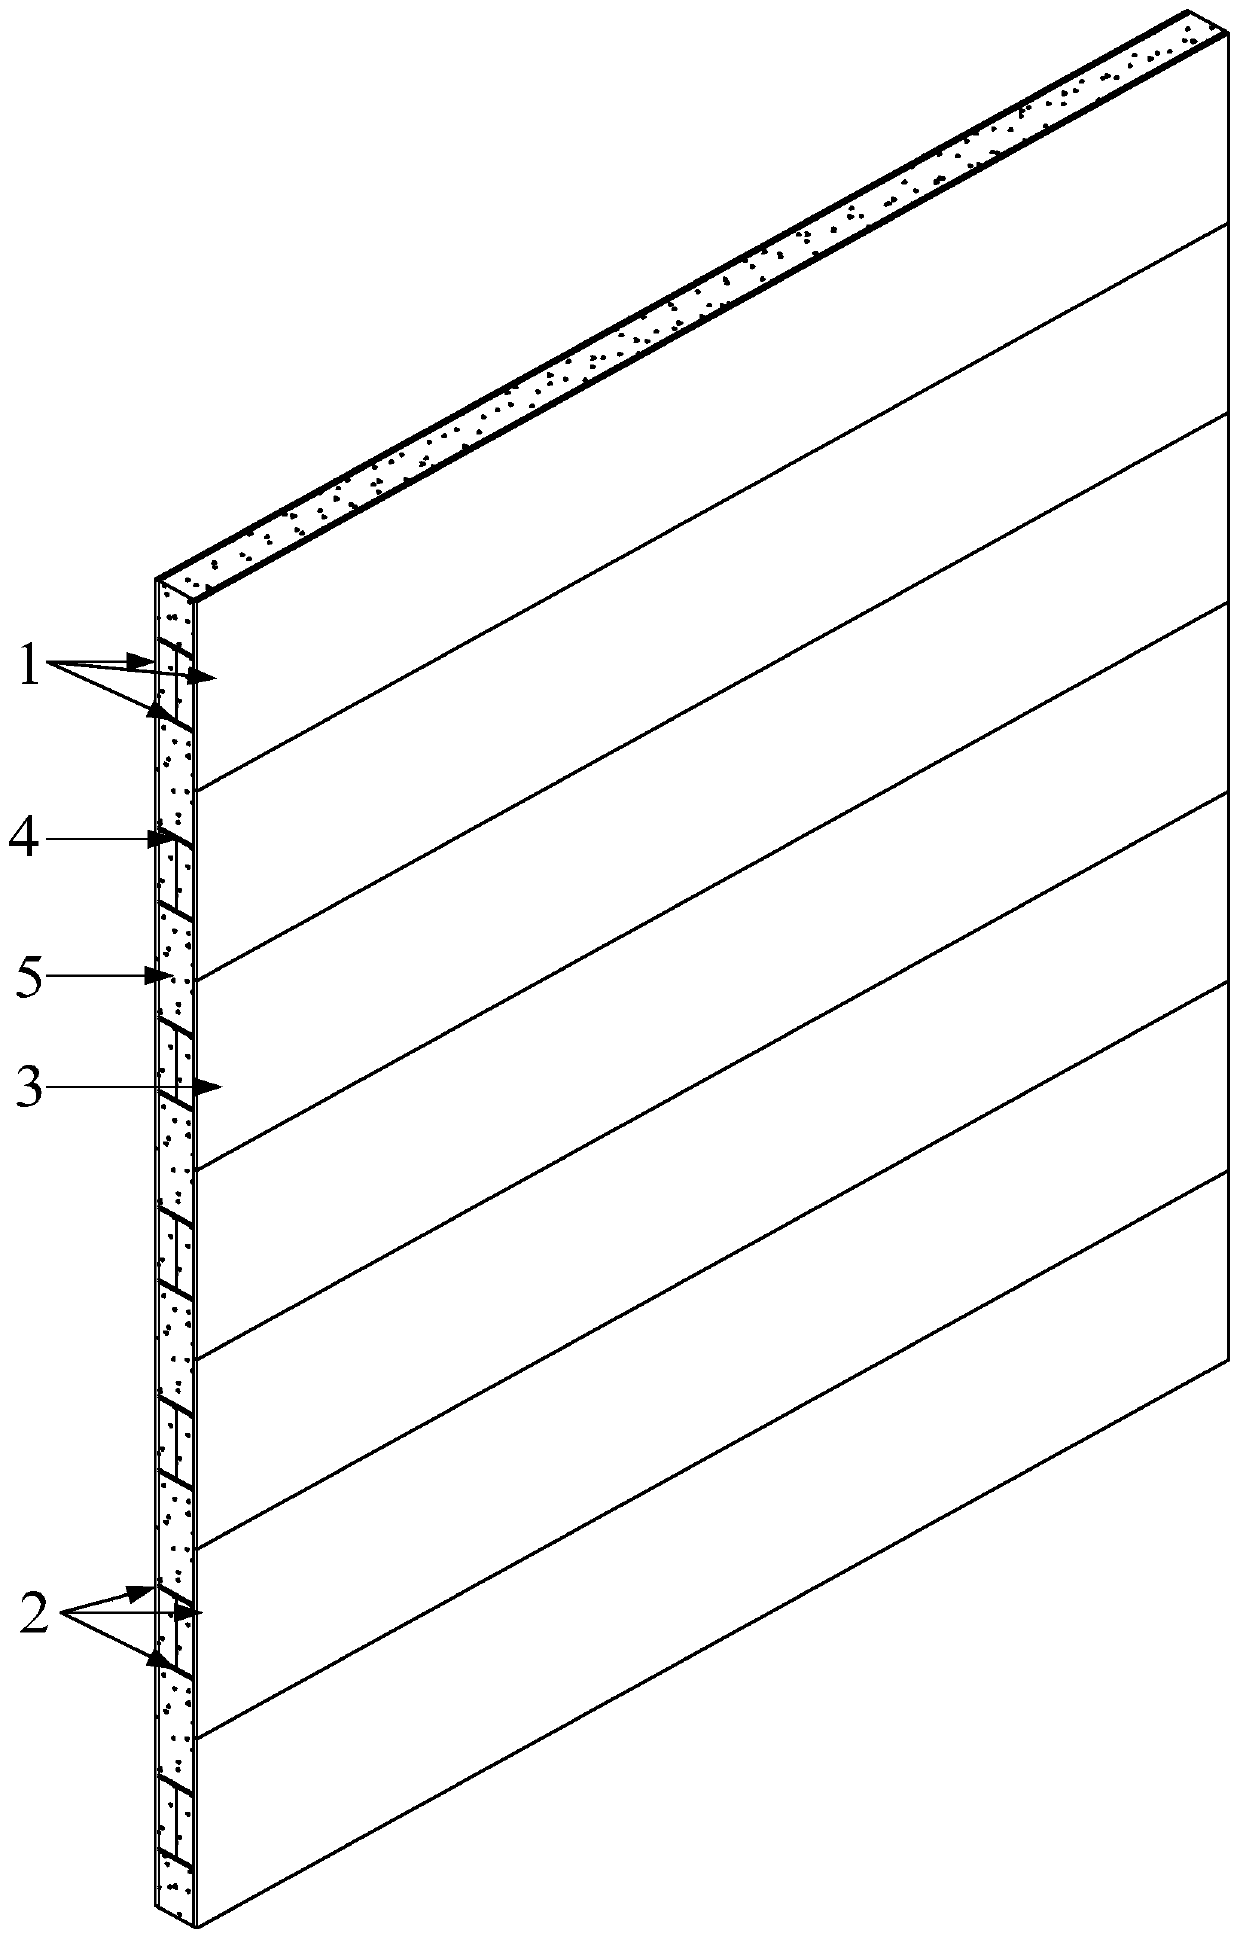 Double-layer steel plate composite shear wall with corrugated web I-shaped steel components transversely arranged in staggered mode